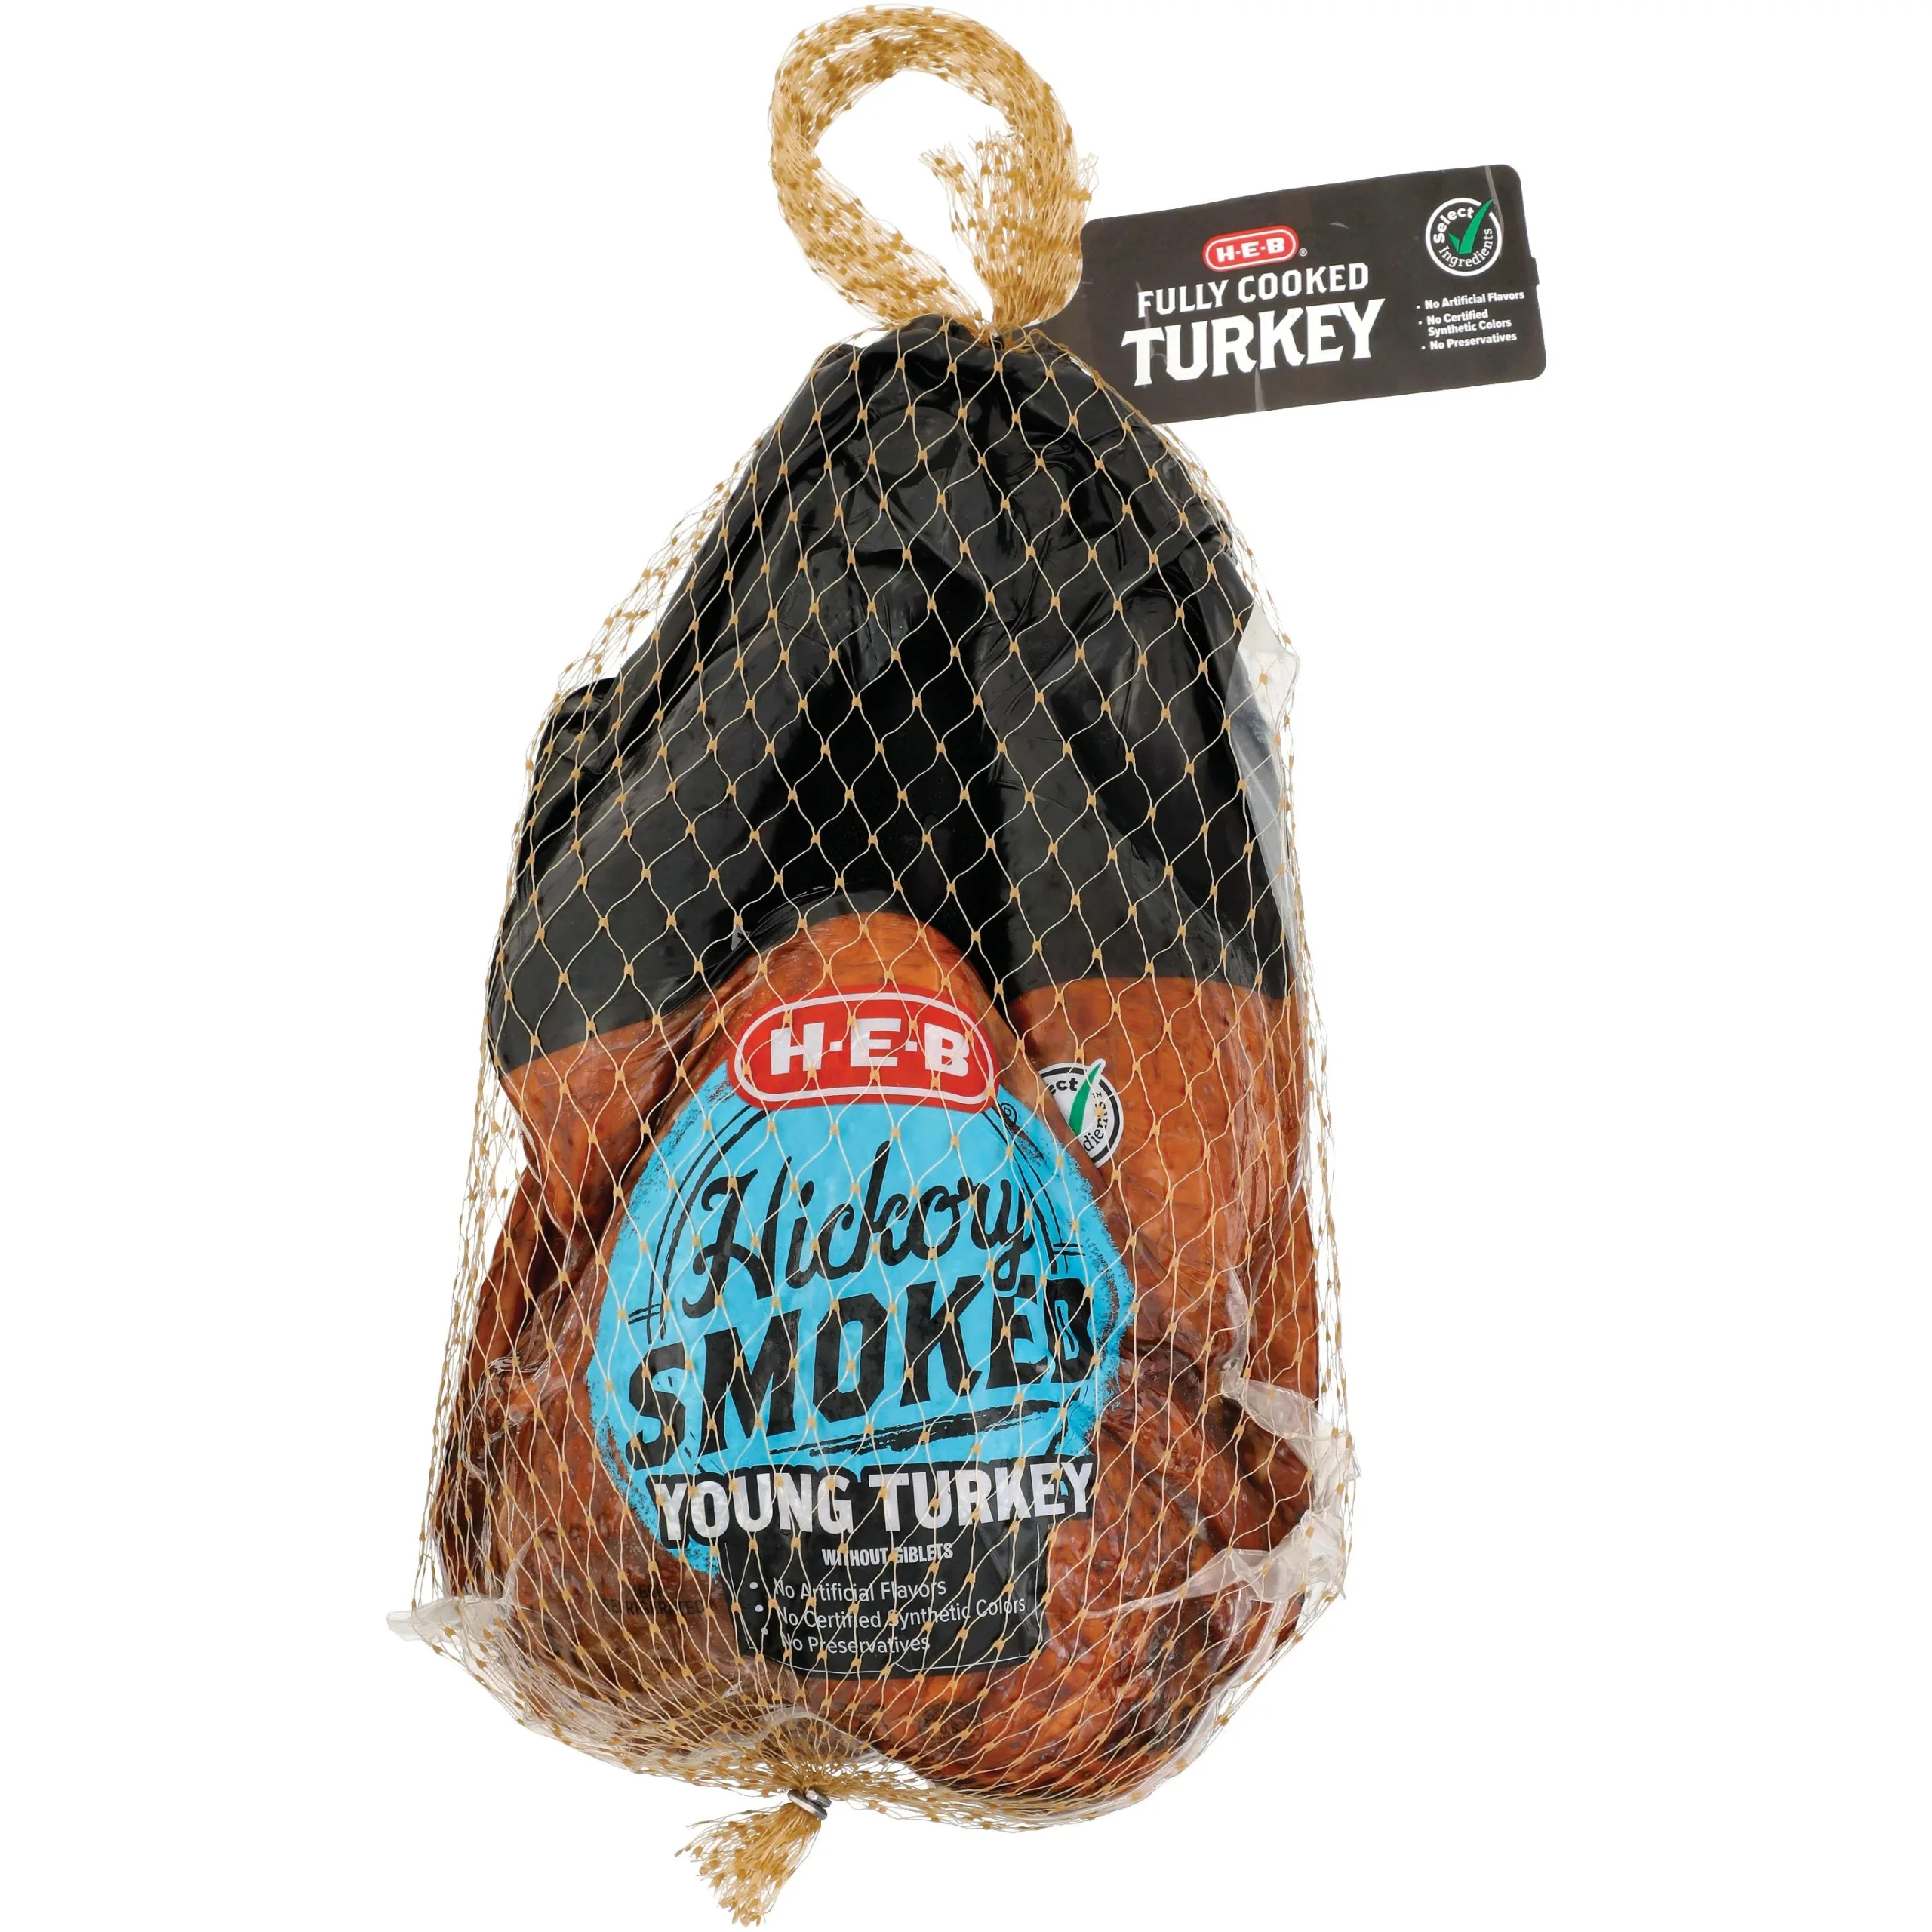 pre cooked smoked turkey - Is precooked turkey safe